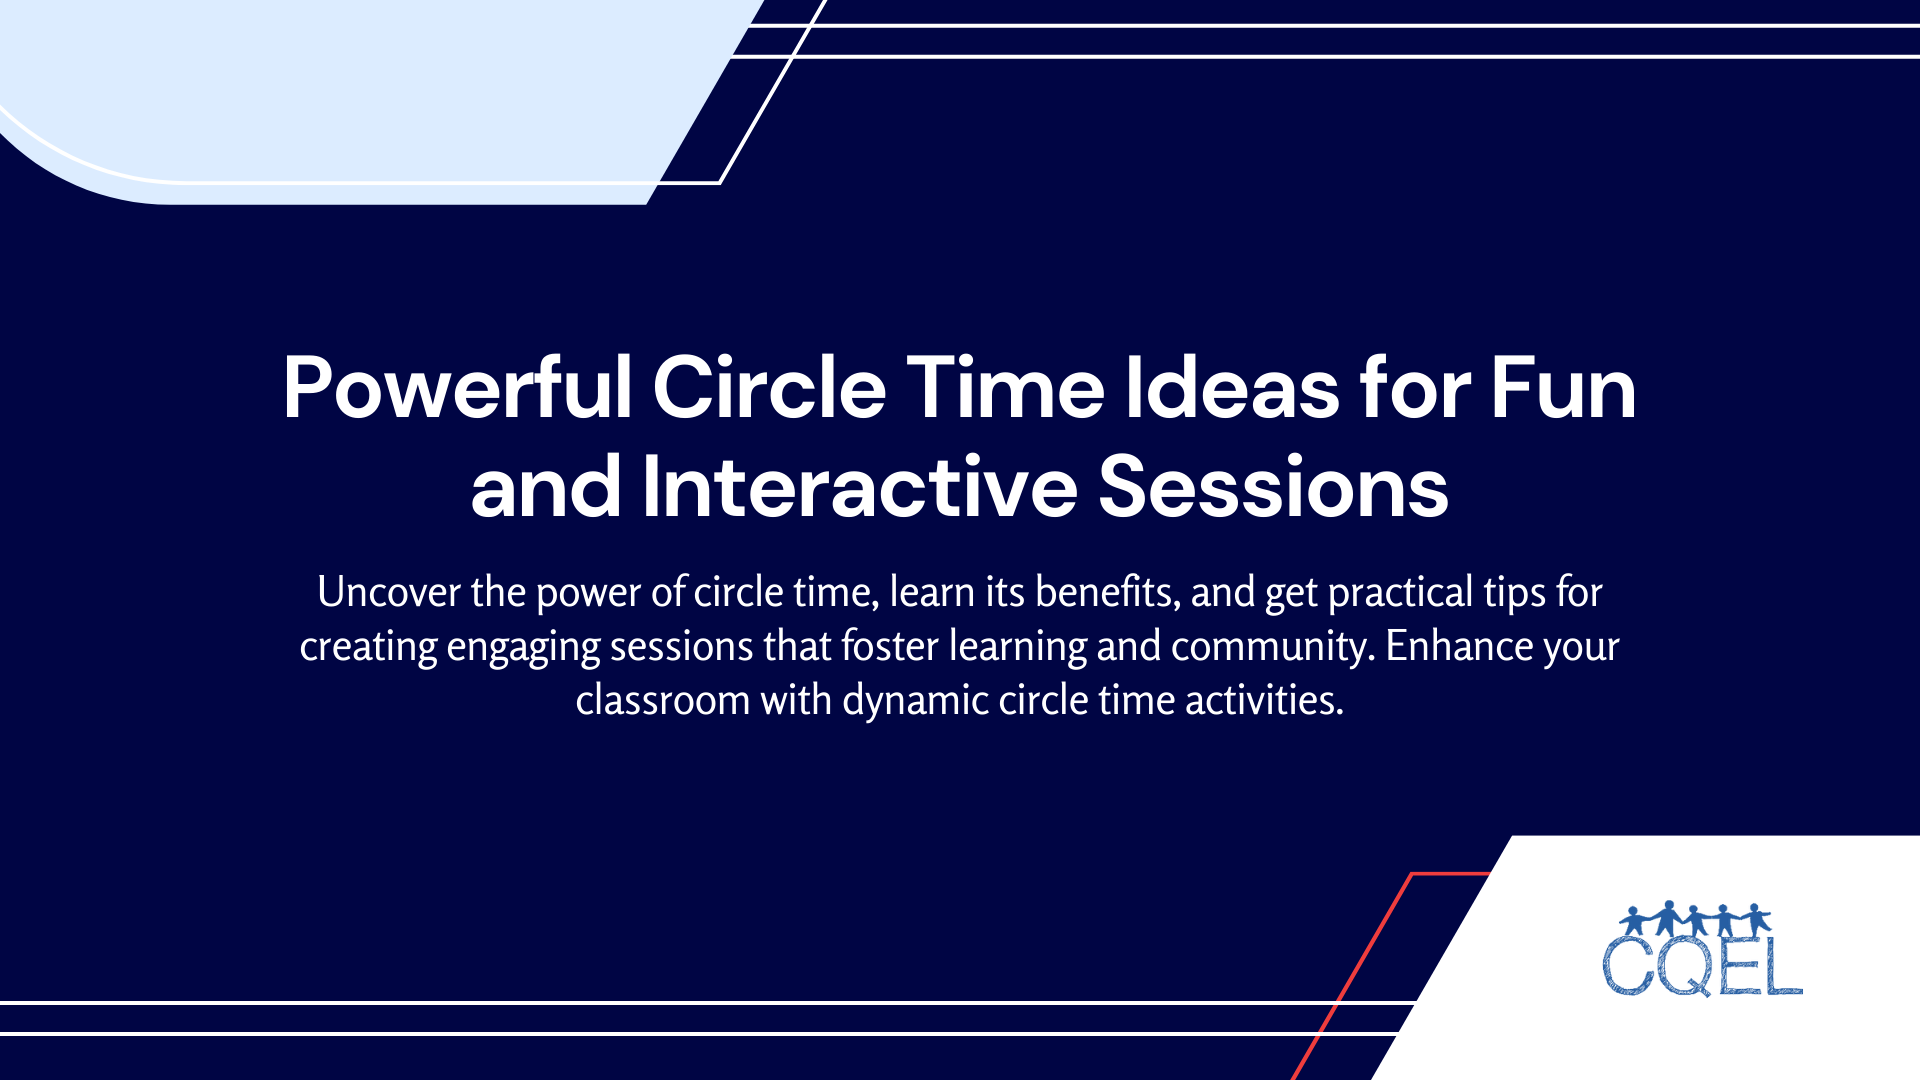 Powerful Circle Time Ideas for Fun and Interactive Sessions